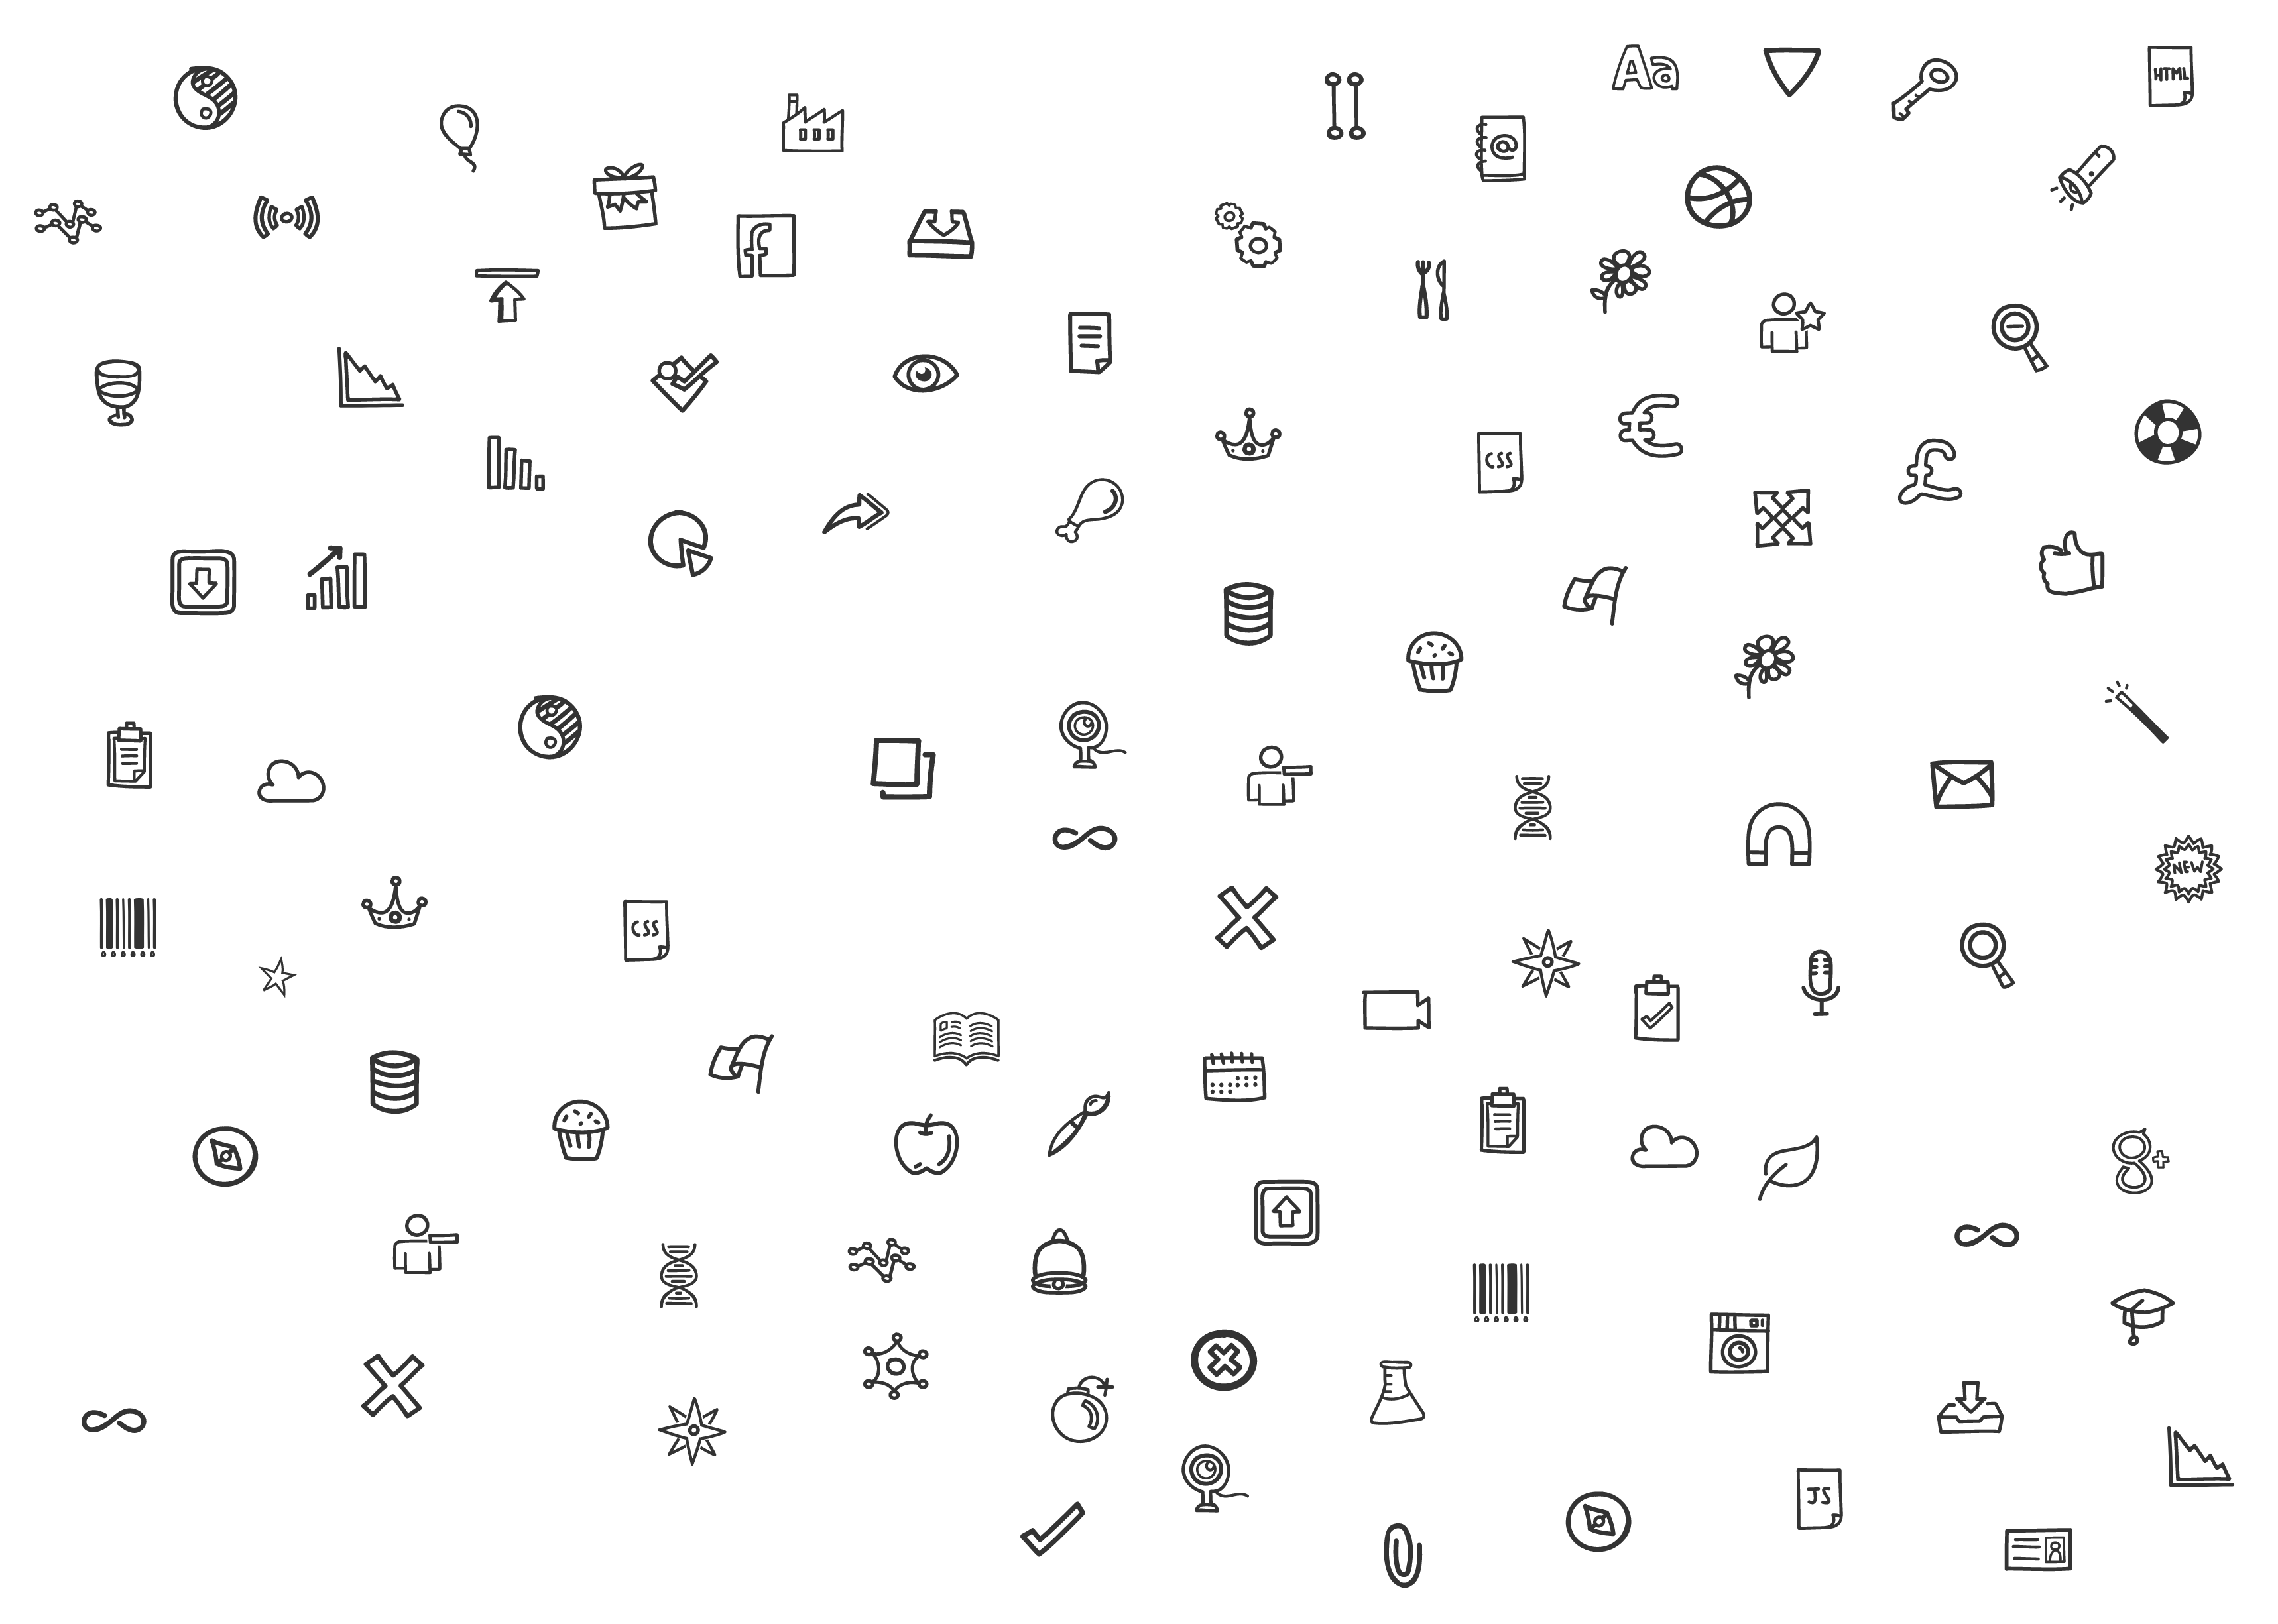 Some example icons